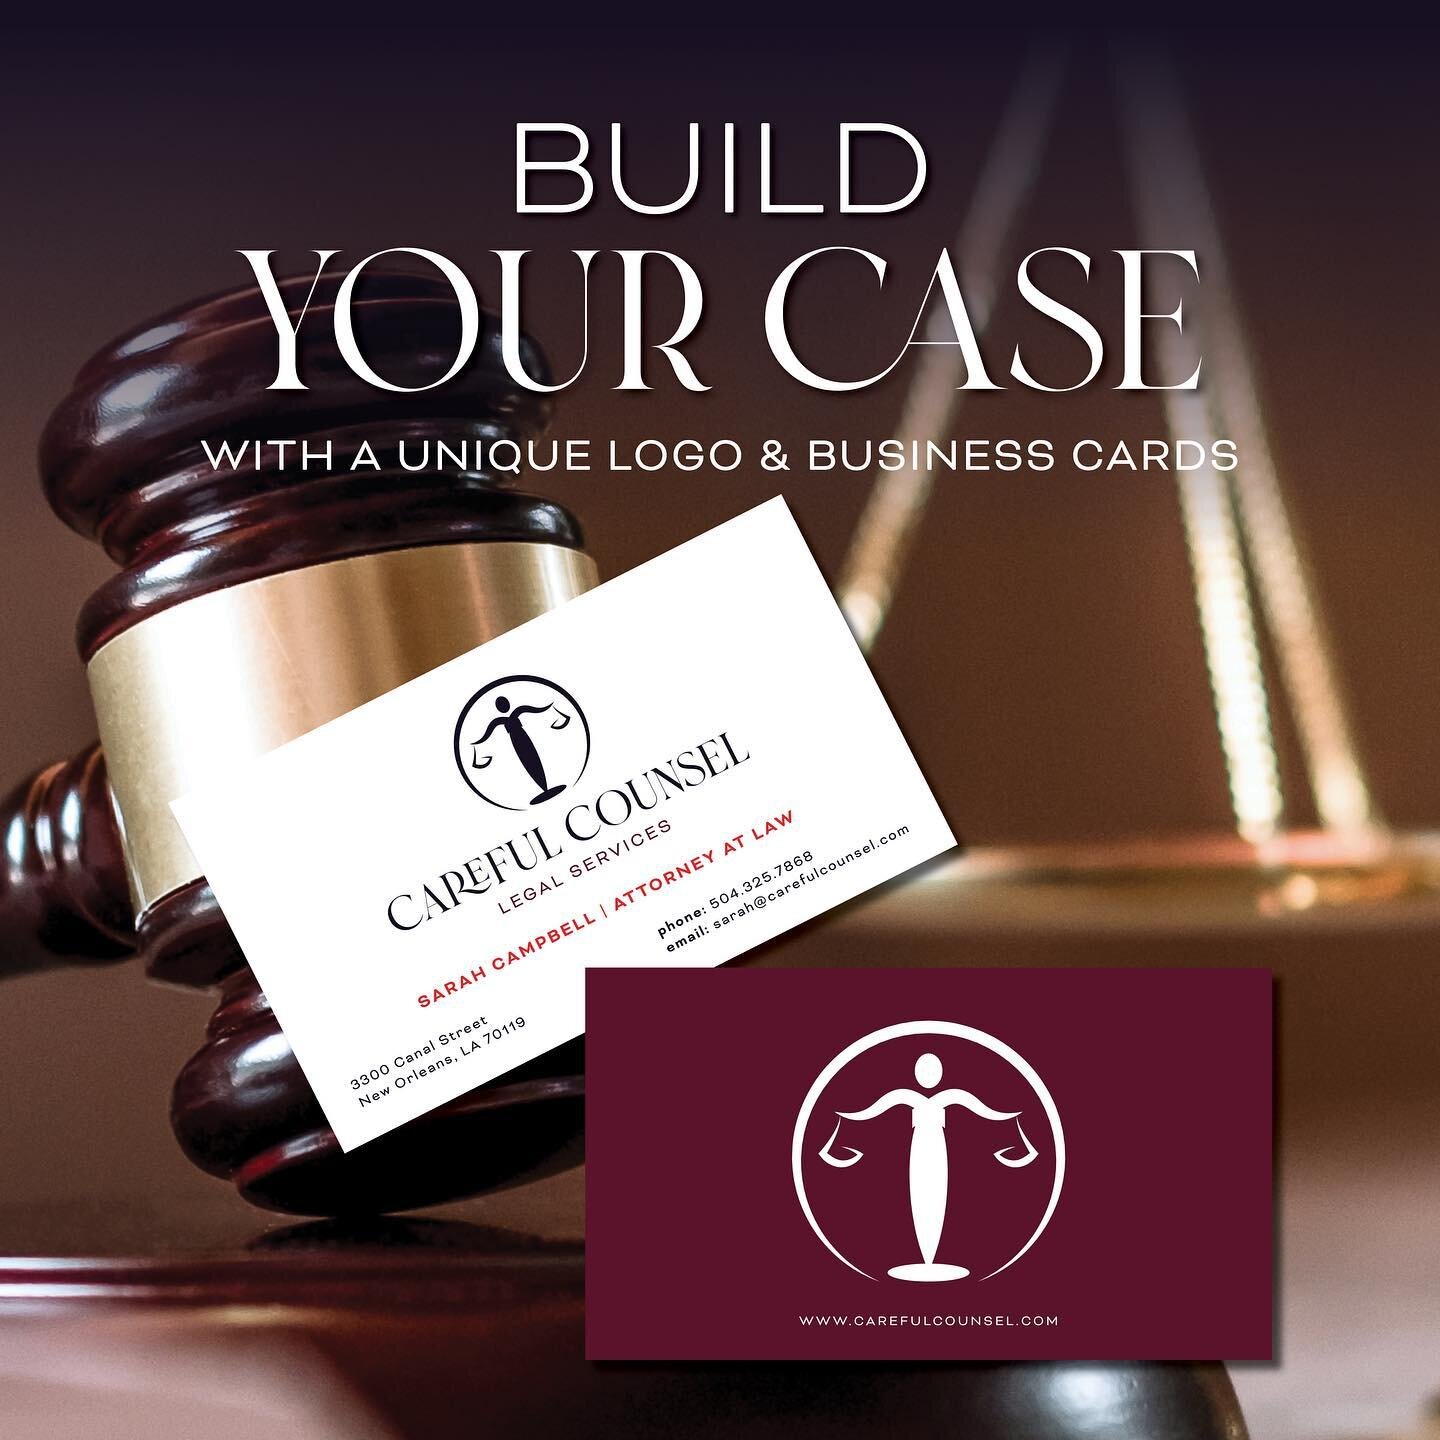 A correct impression of the services you provide is essential to your business. The Calling Card leads you step by step to a brand that shows the integrity of your business with just one look. The harder we work together, the better the results. Case